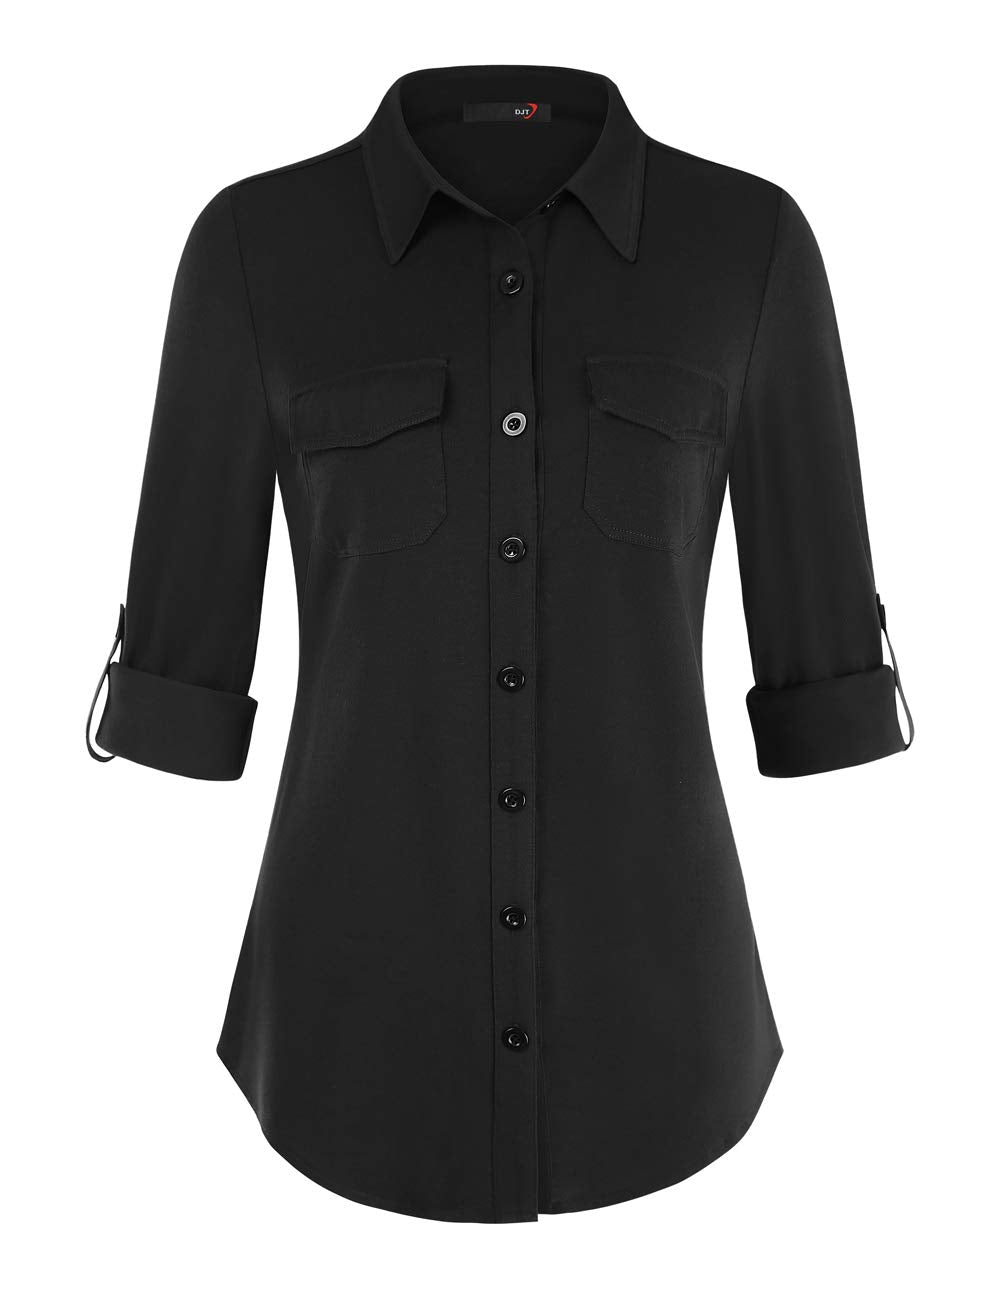 DJT Roll Up Long Sleeve Solid Black Women’s Collared Button Down Plaid Shirt